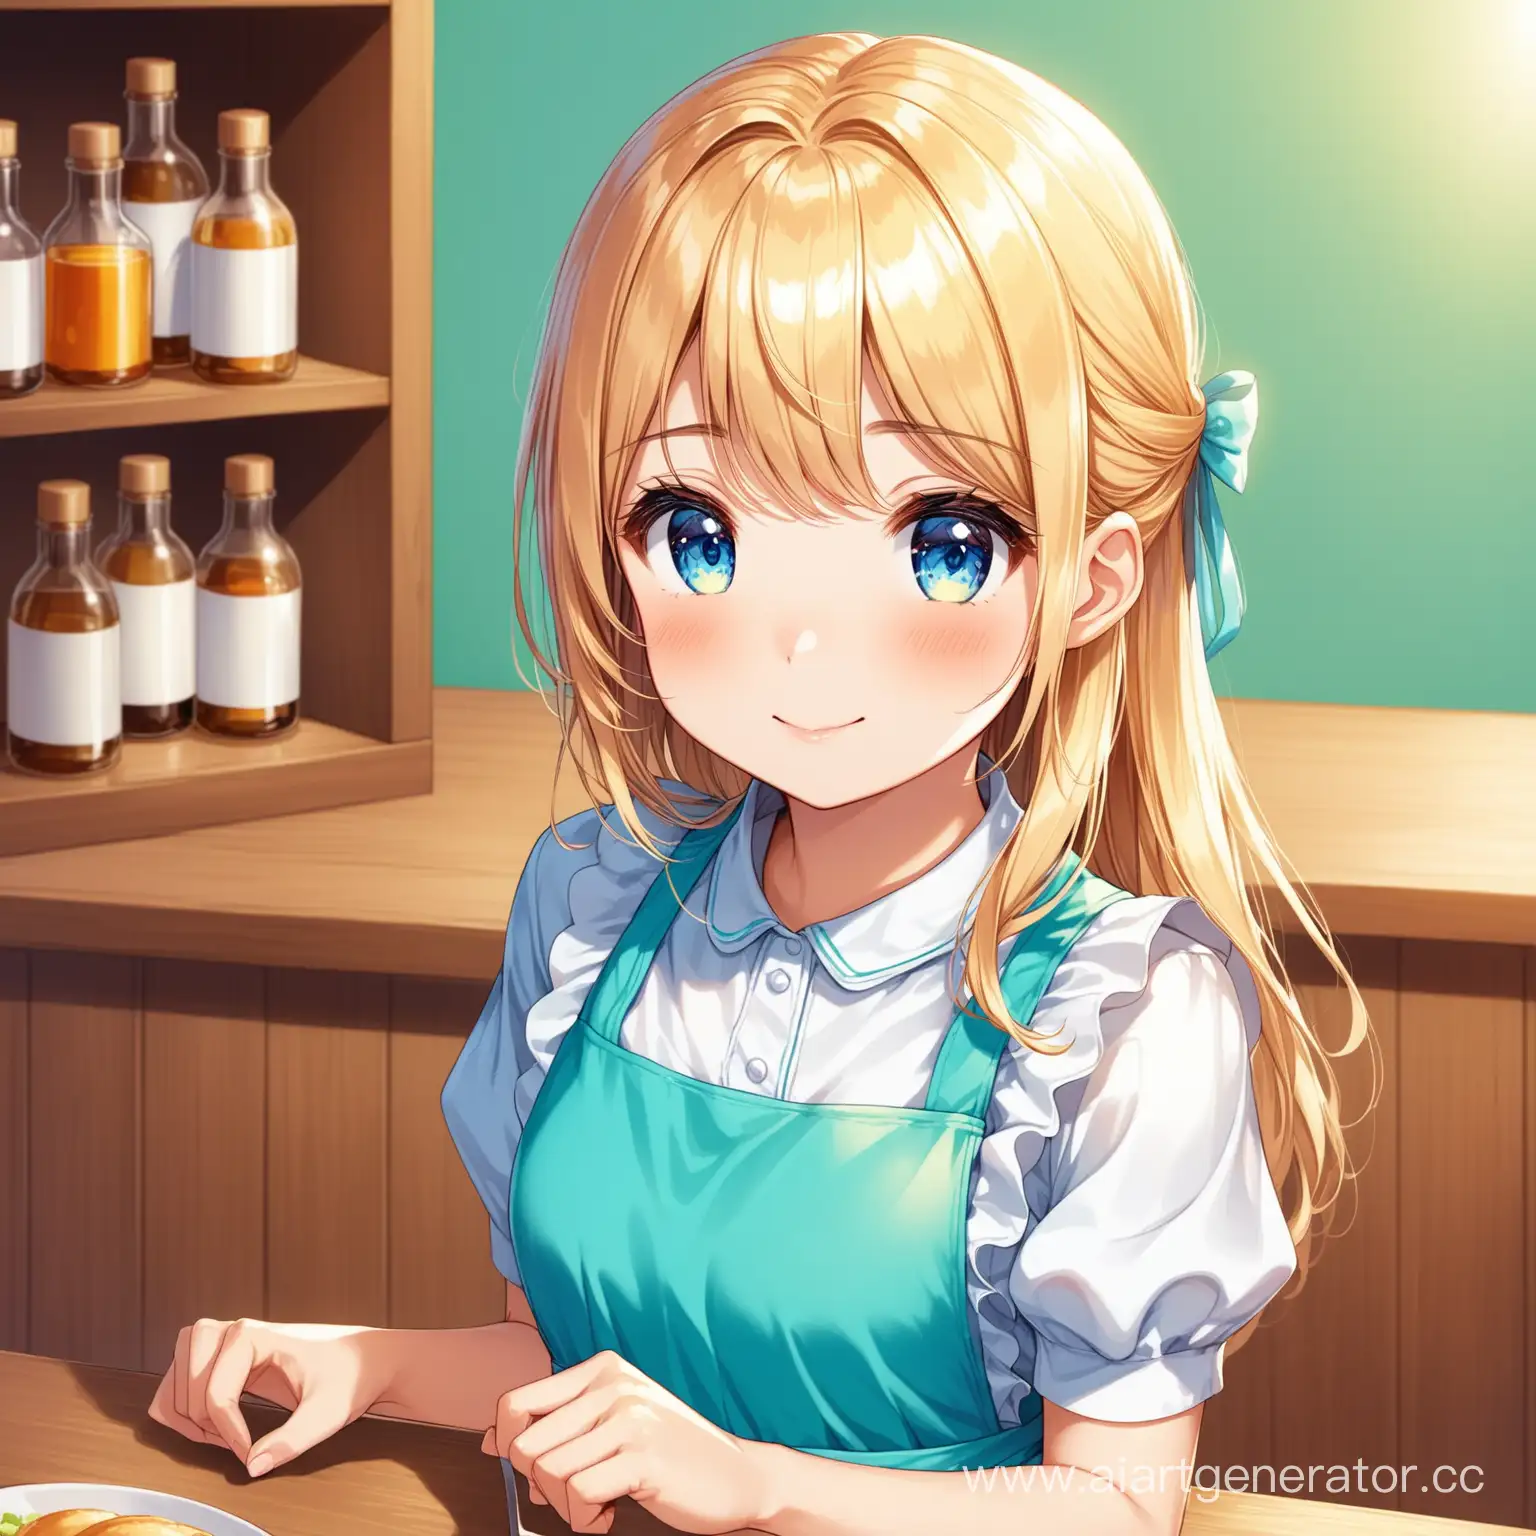 Kind-FairHaired-Girl-in-Apron-and-Blue-Dress